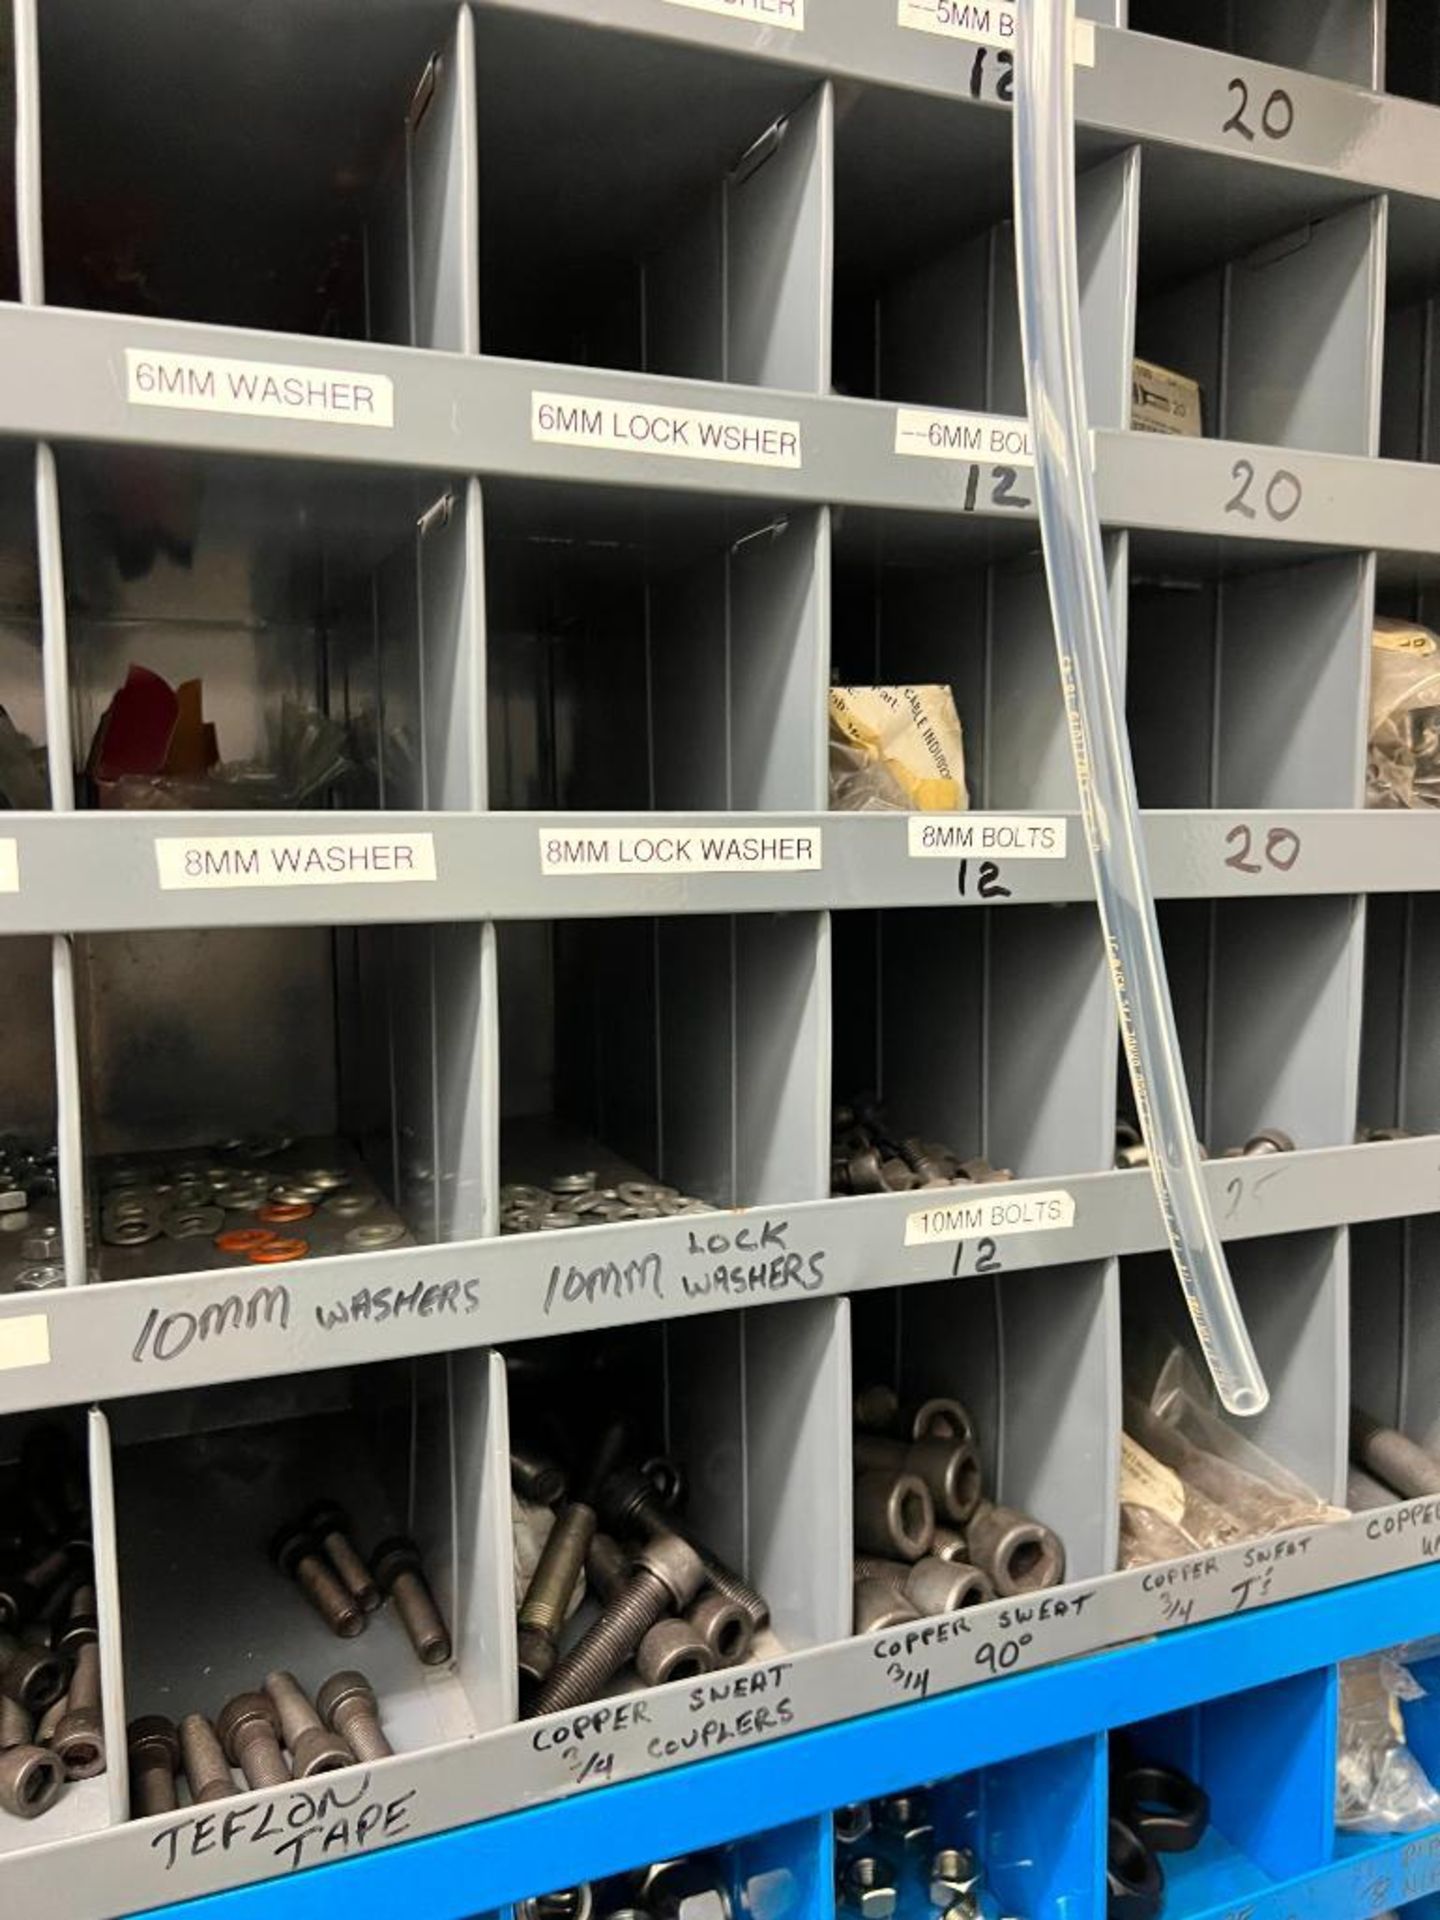 (28) Shelves of Assorted Parts, VERY LARGE LOT Consisting of MRO, Drives, Valves, PLC, Nuts, Bolts, - Image 18 of 67